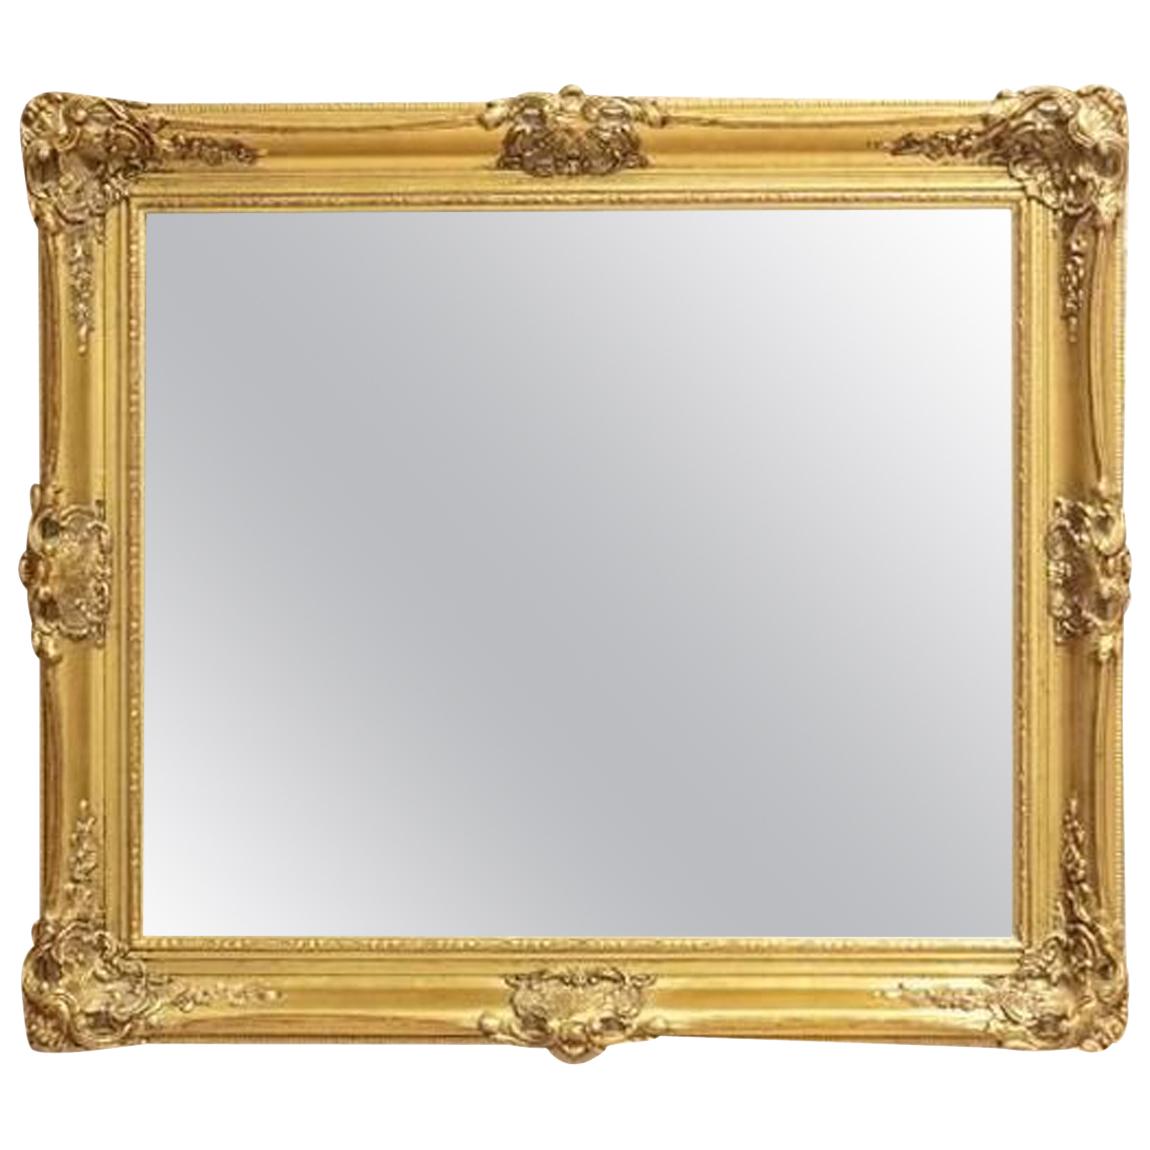 French Mirror in a Gilded Frame, circa 1900